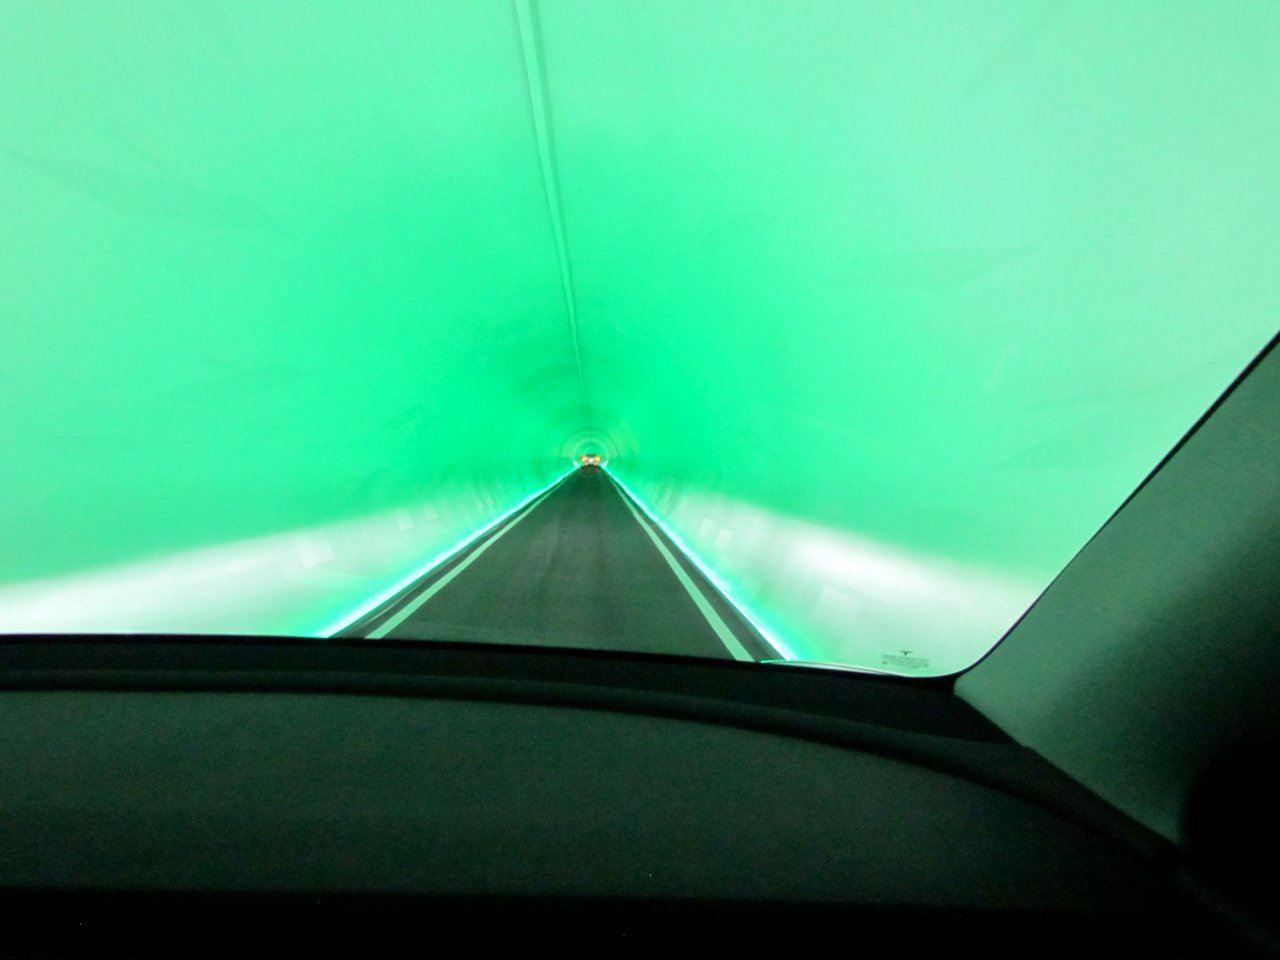 Tesla, SEMA Seen: Taking a ride in the Tesla Tunnel, ClassicCars.com Journal